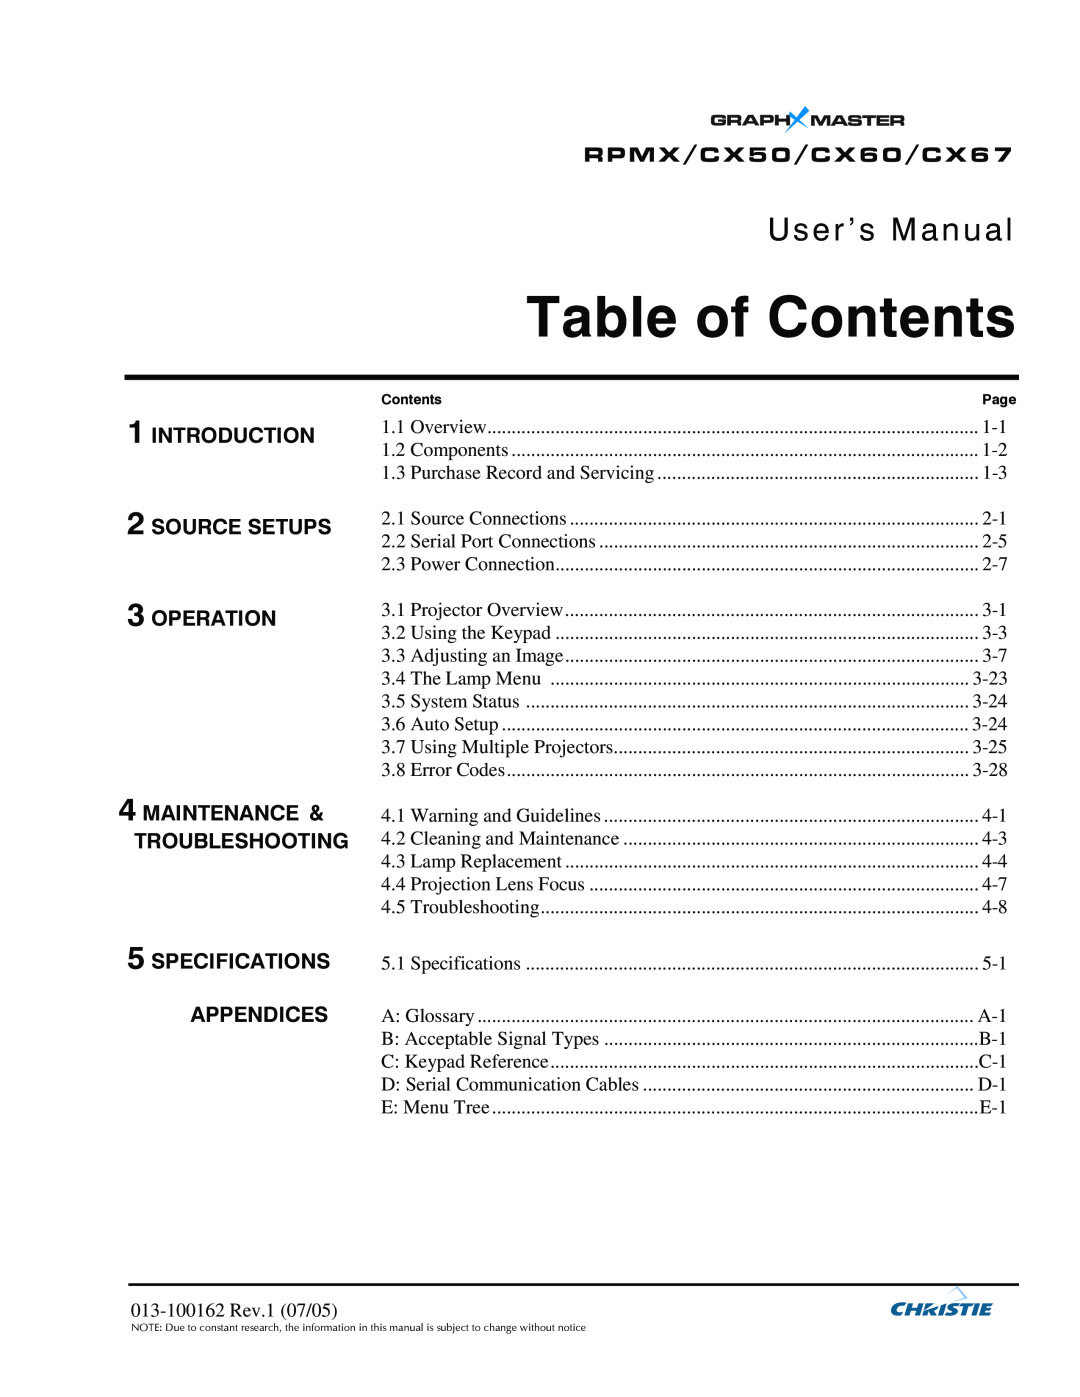 Christie Digital Systems user manual Table of Contents, User’s Manual, RPMX/CX50/CX60/CX67, Introduction, Source Setups 